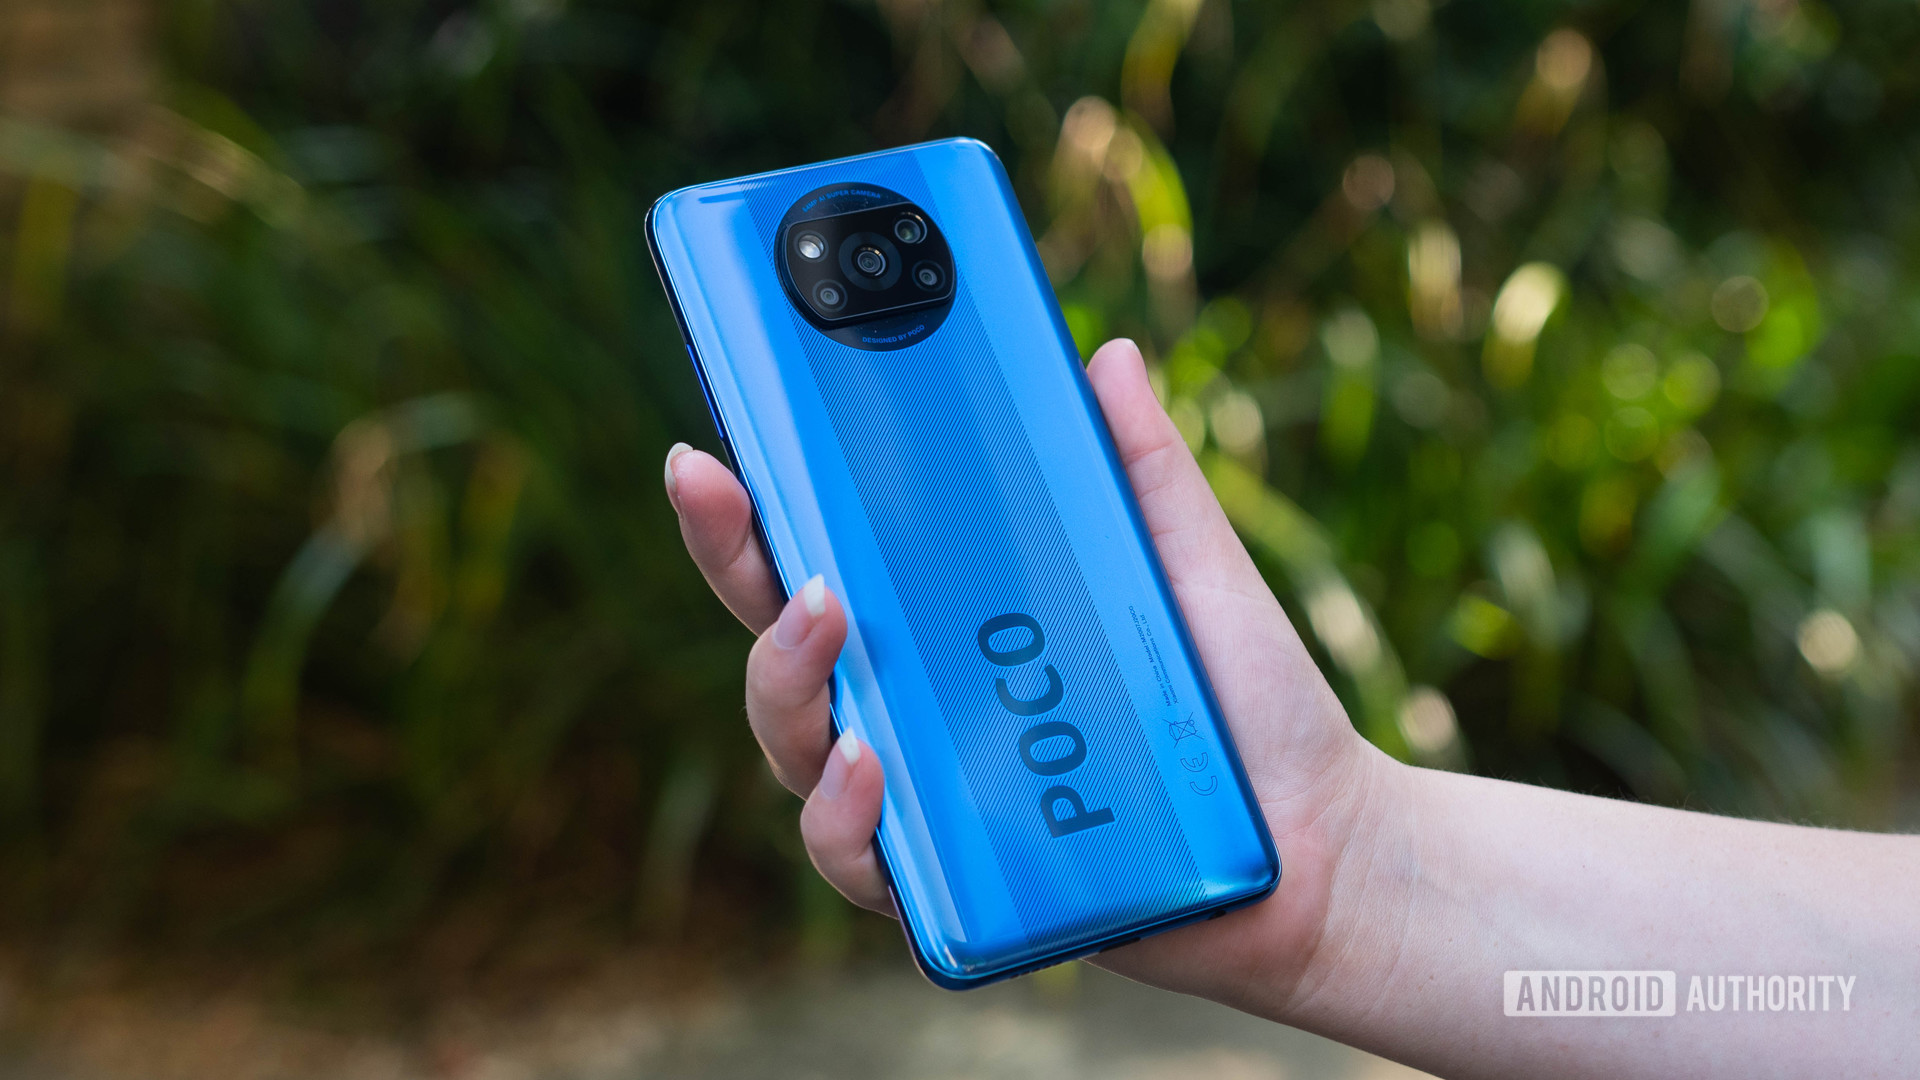 Xiaomi Poco X3 NFC held in the hand outside to show off the rear side